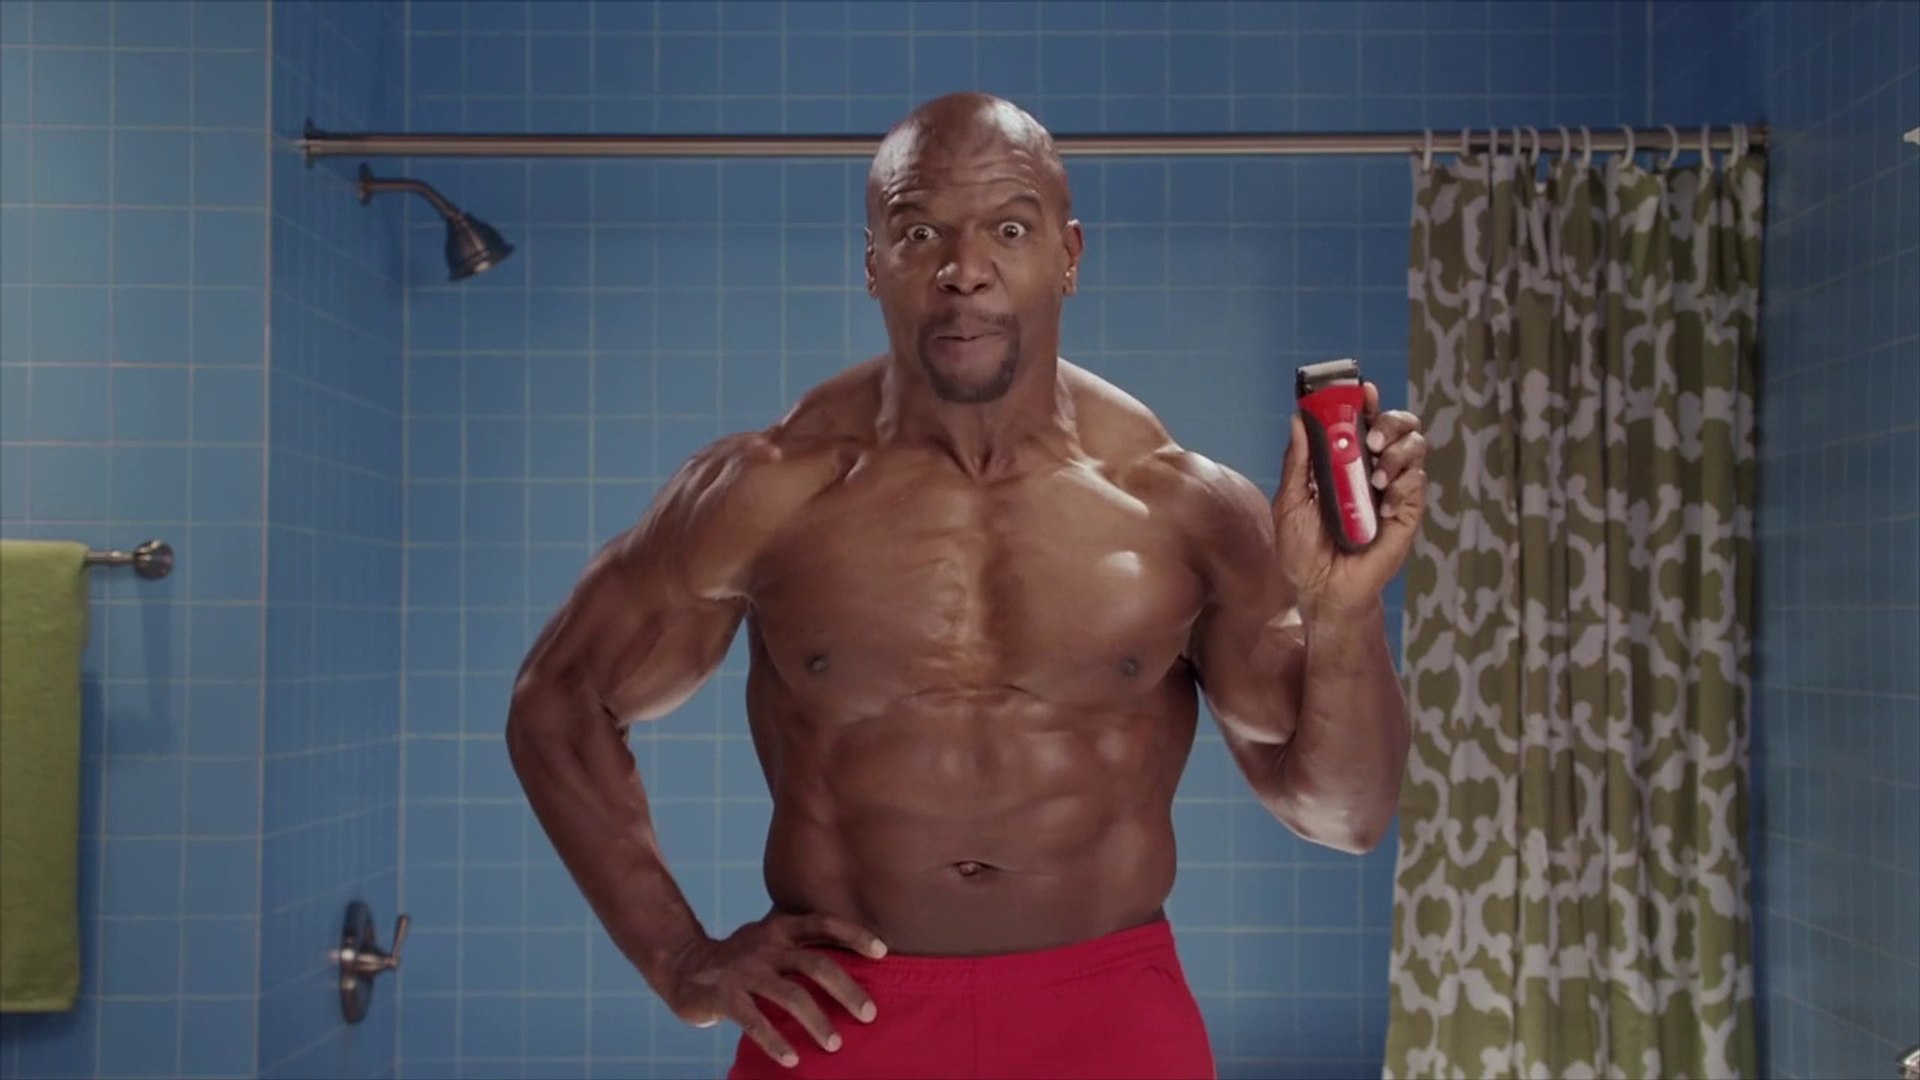 funny old spice ads